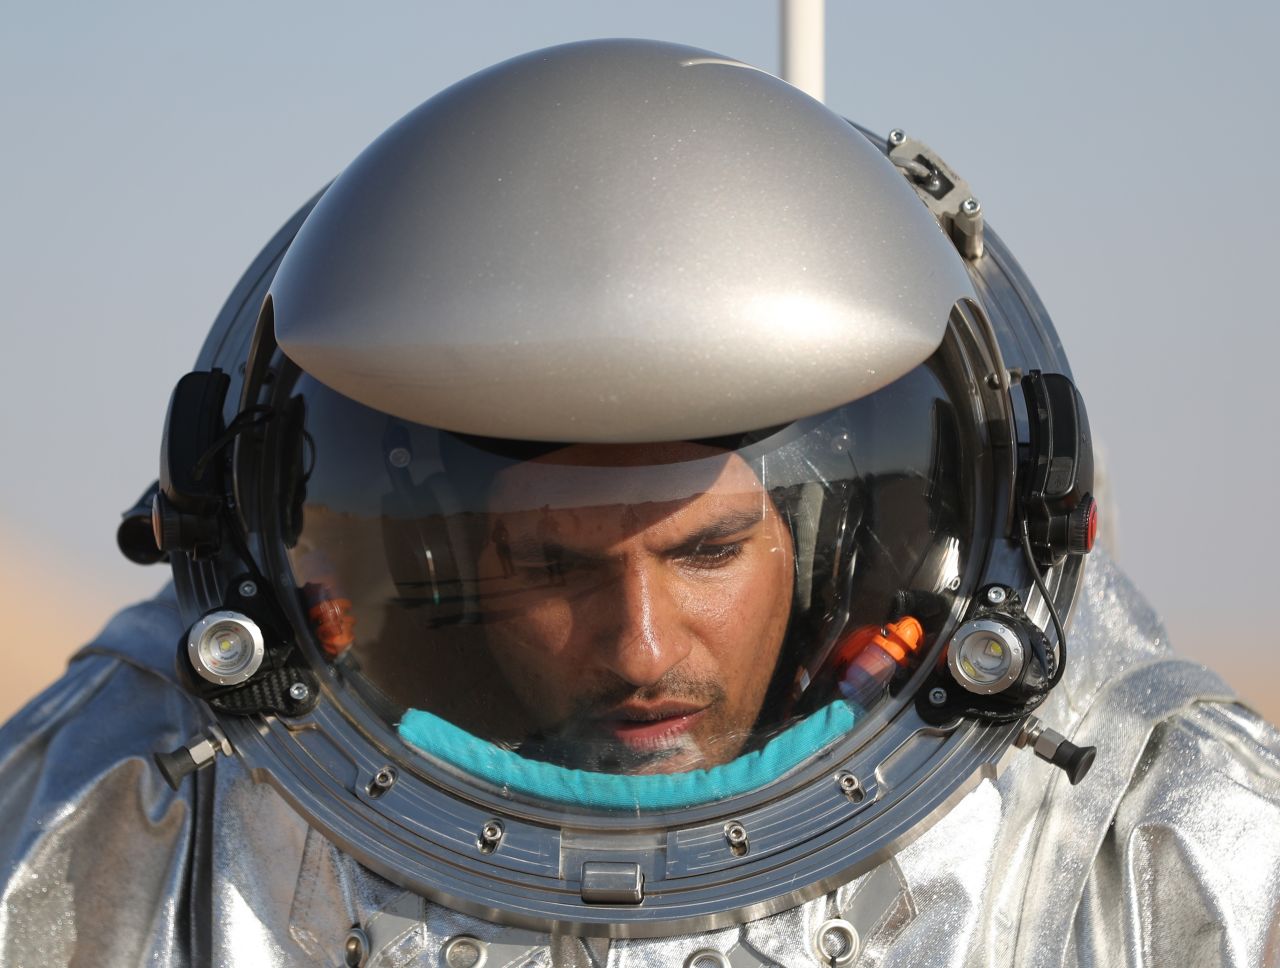 An AMADEE-18 analog astronaut heads out to conduct experiments in Oman's Dhofar region.